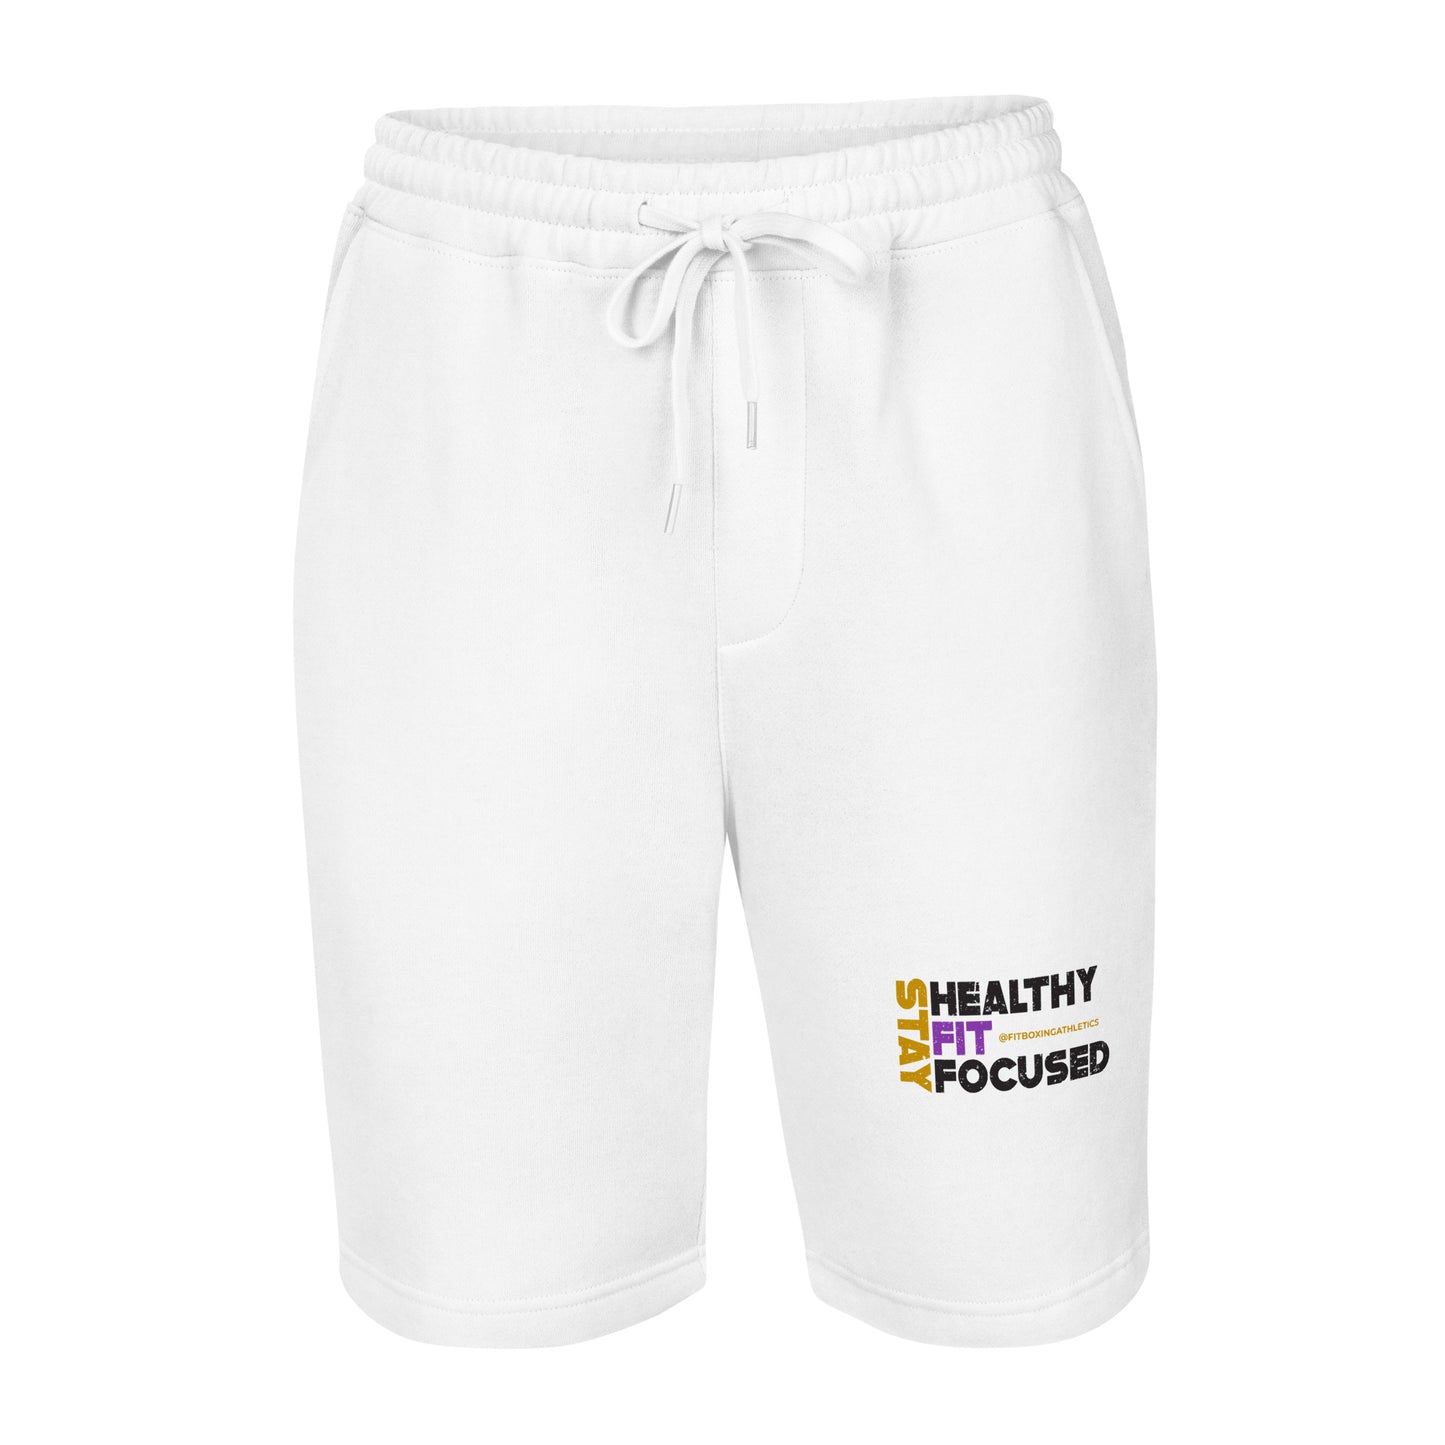 Stay Healthy Fit Focused Men shorts